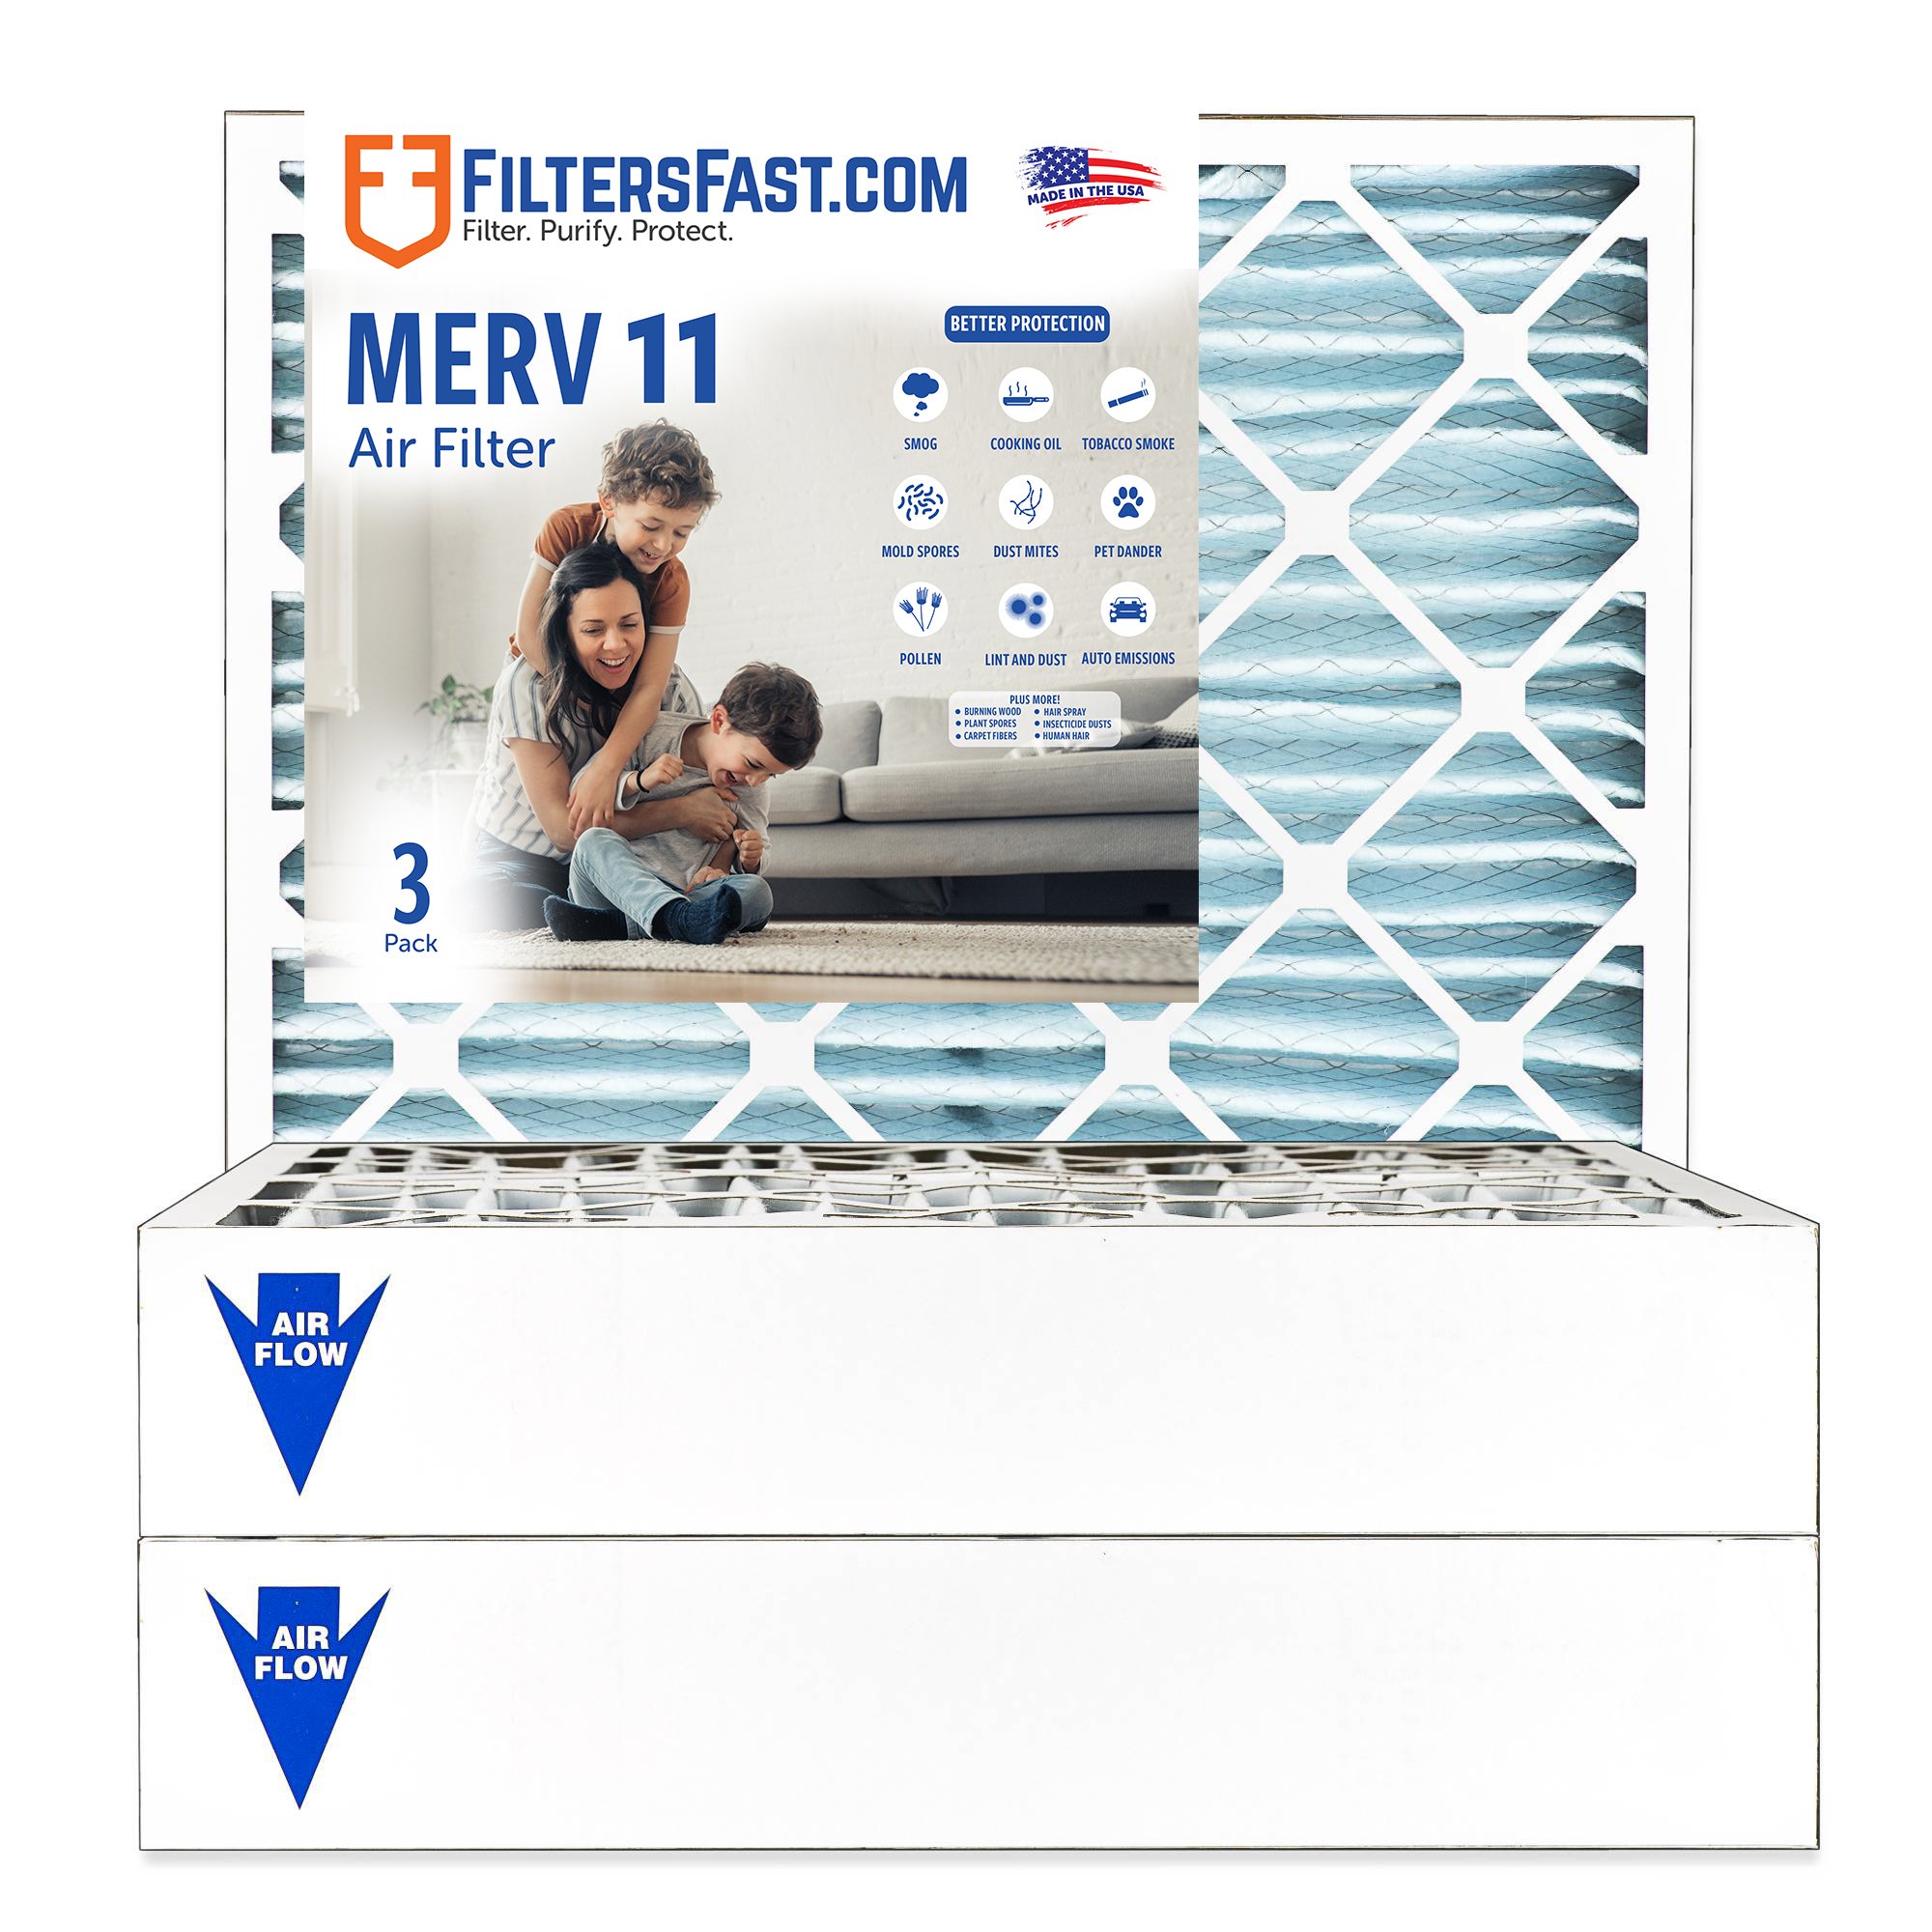 4" MERV 11 Furnace & AC Air Filter by Filters Fast® - 3-Pack